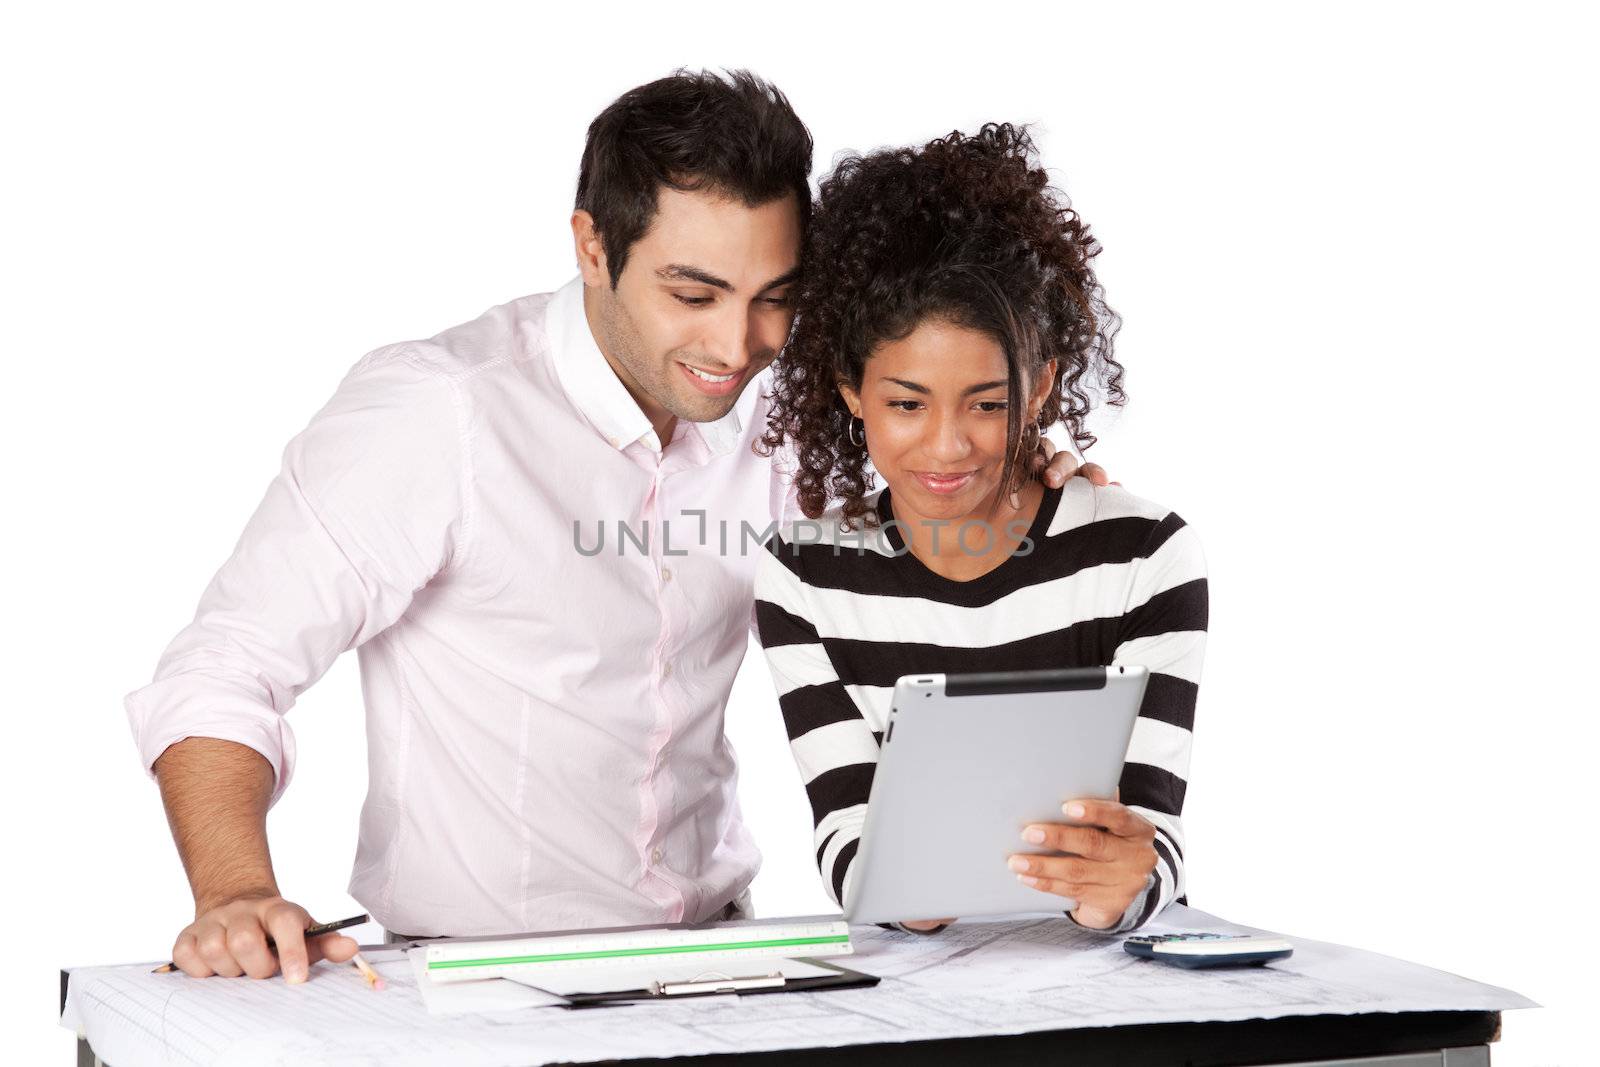 Two architects using digital tablet at work isolated on white background.